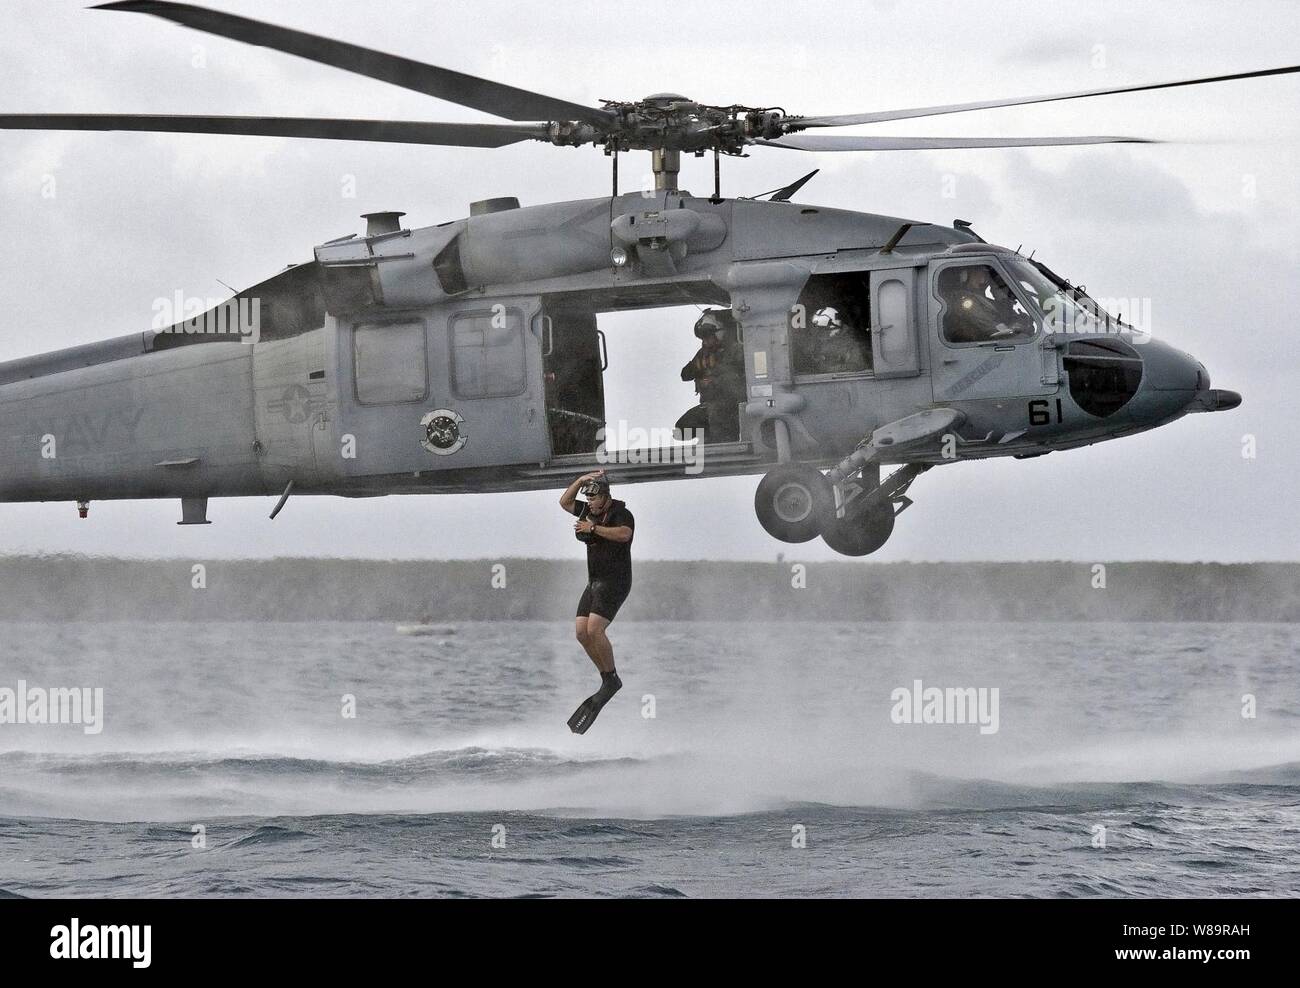 Navy Petty Officer 1st Class Eric Sutton jumps into the Pacific Ocean from a hovering MH-60S Seahawk helicopter during a search and rescue training exercise off the coast of Guam on Dec. 8, 2005.  Sutton, a Navy aviation machinist's mate, is a search and rescue swimmer attached to Helicopter Sea Combat Squadron 25 deployed to Anderson Air Force Base, Guam. Stock Photo